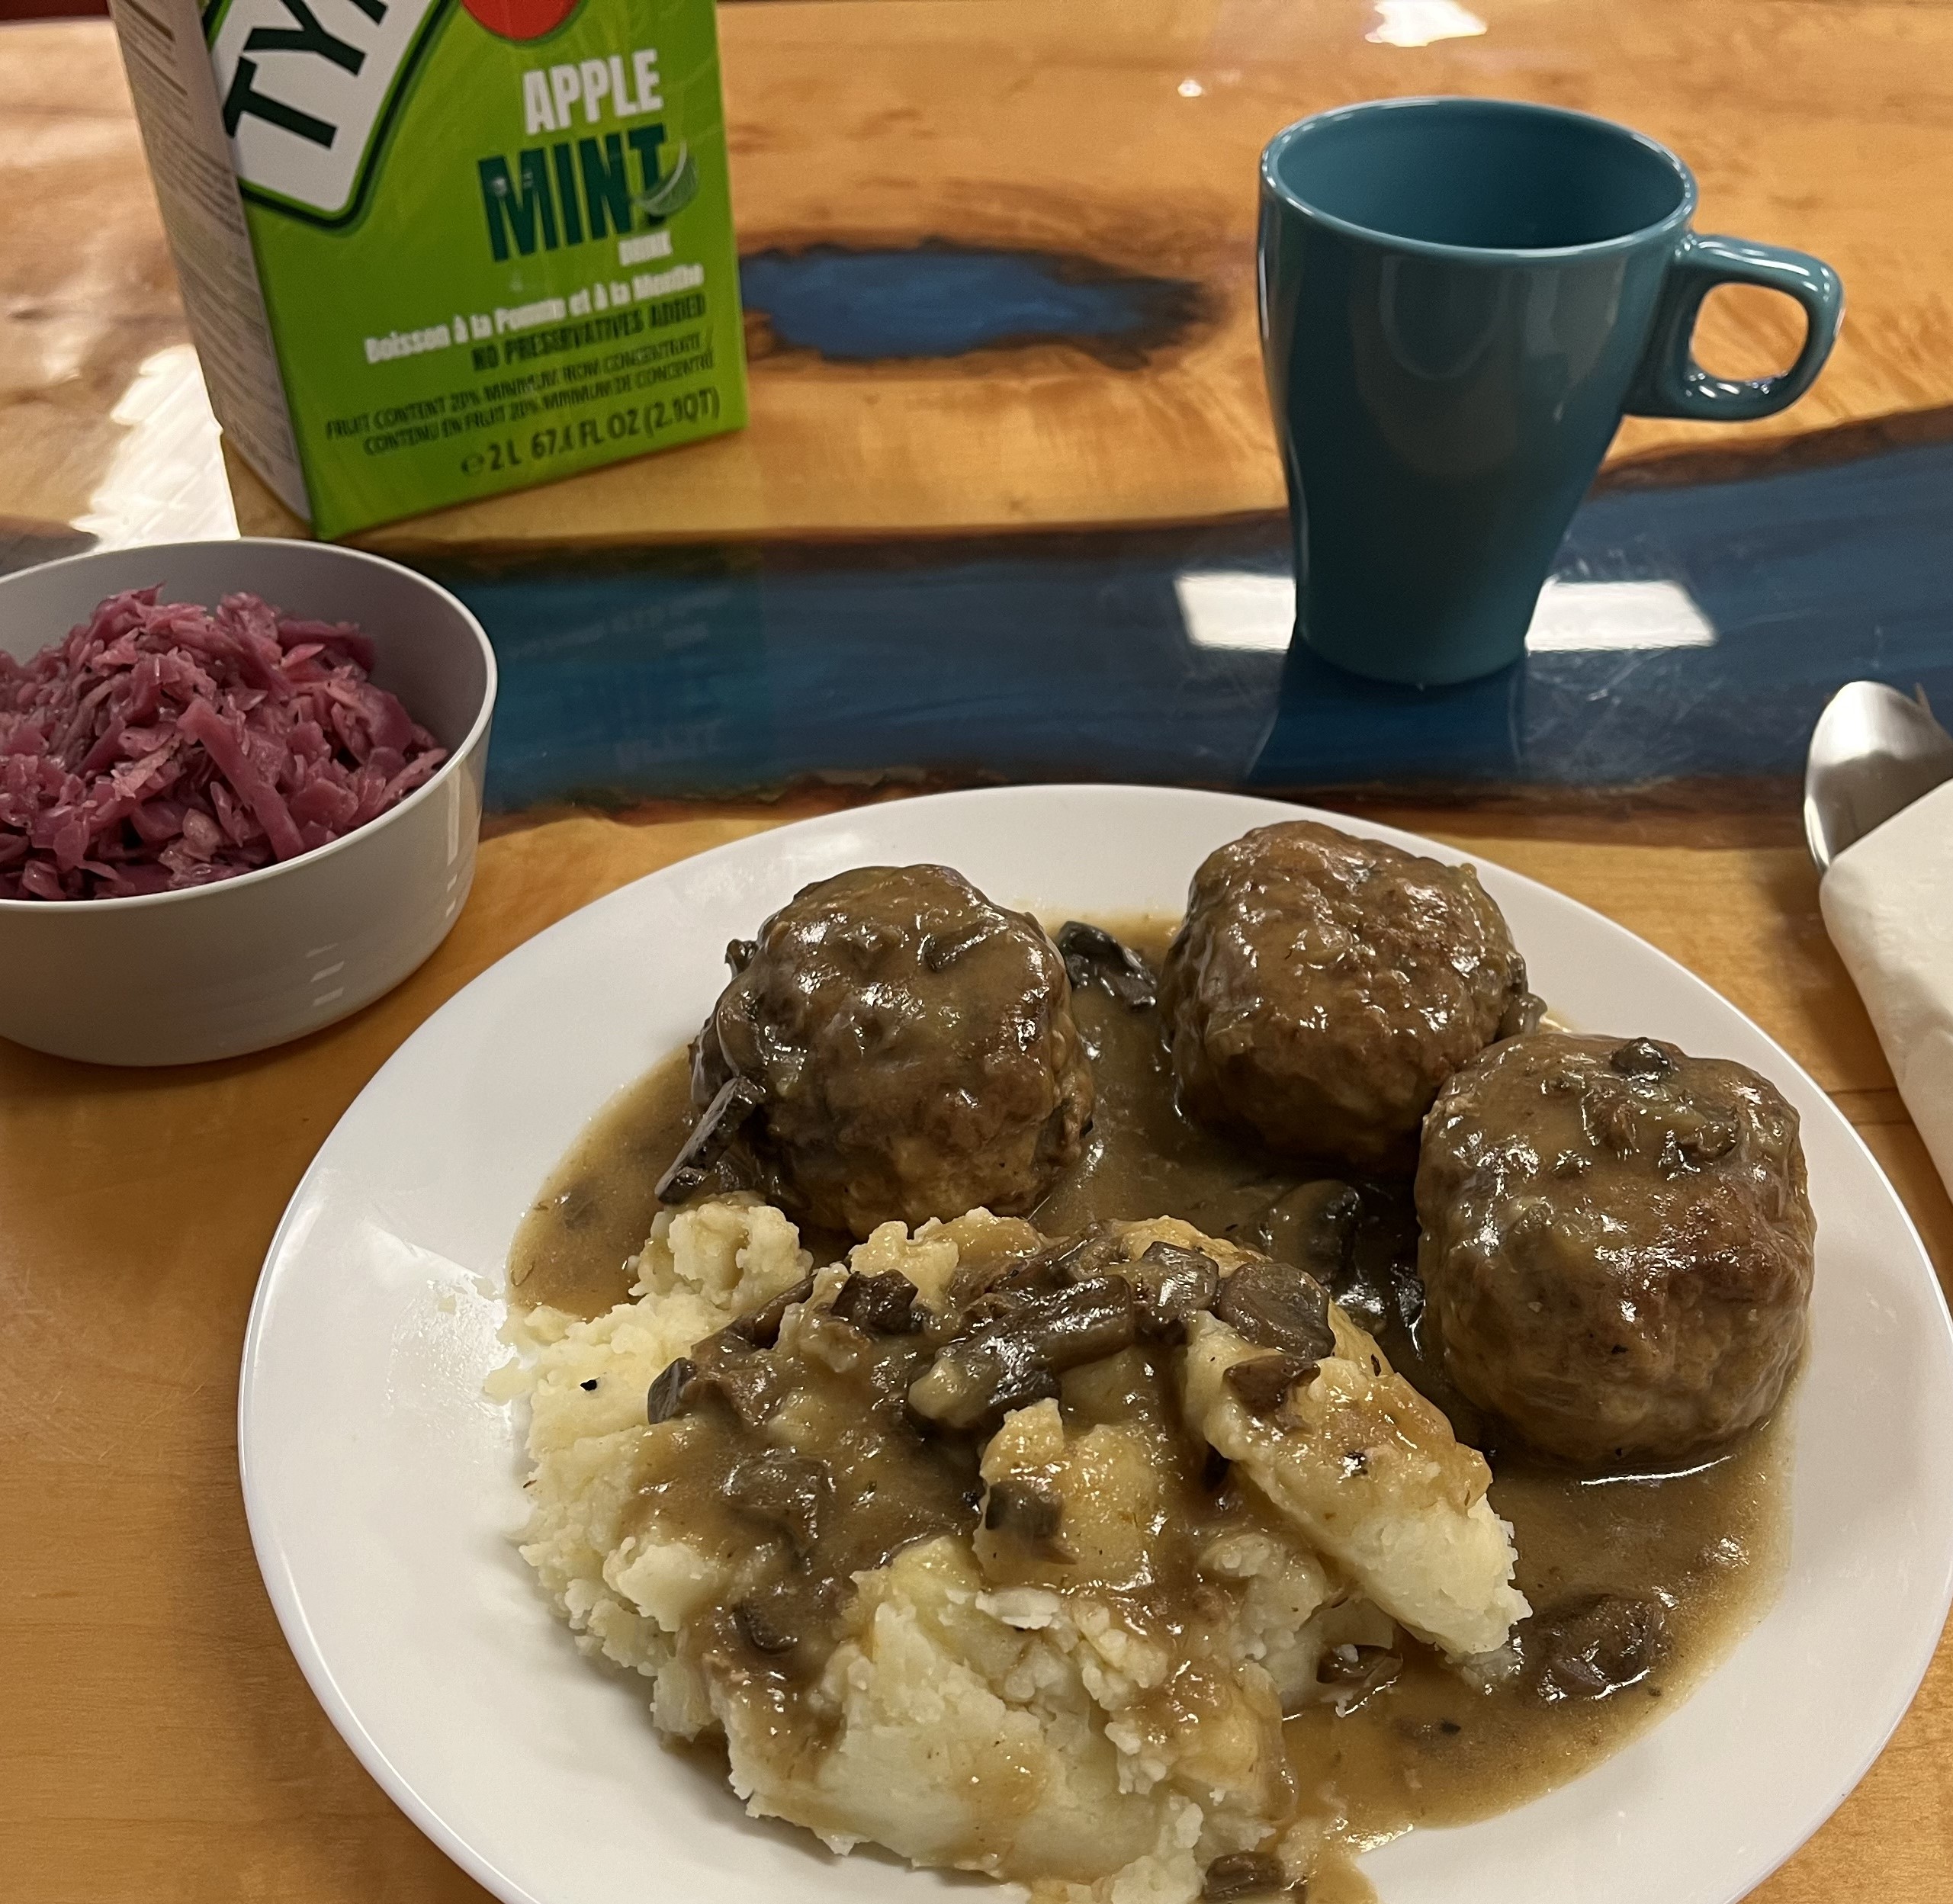 Kat's homemade meatballs with mashed potatoes and mushroom gravy sauce served on a white plate with a side bowl of Slavic house vegetable salad.